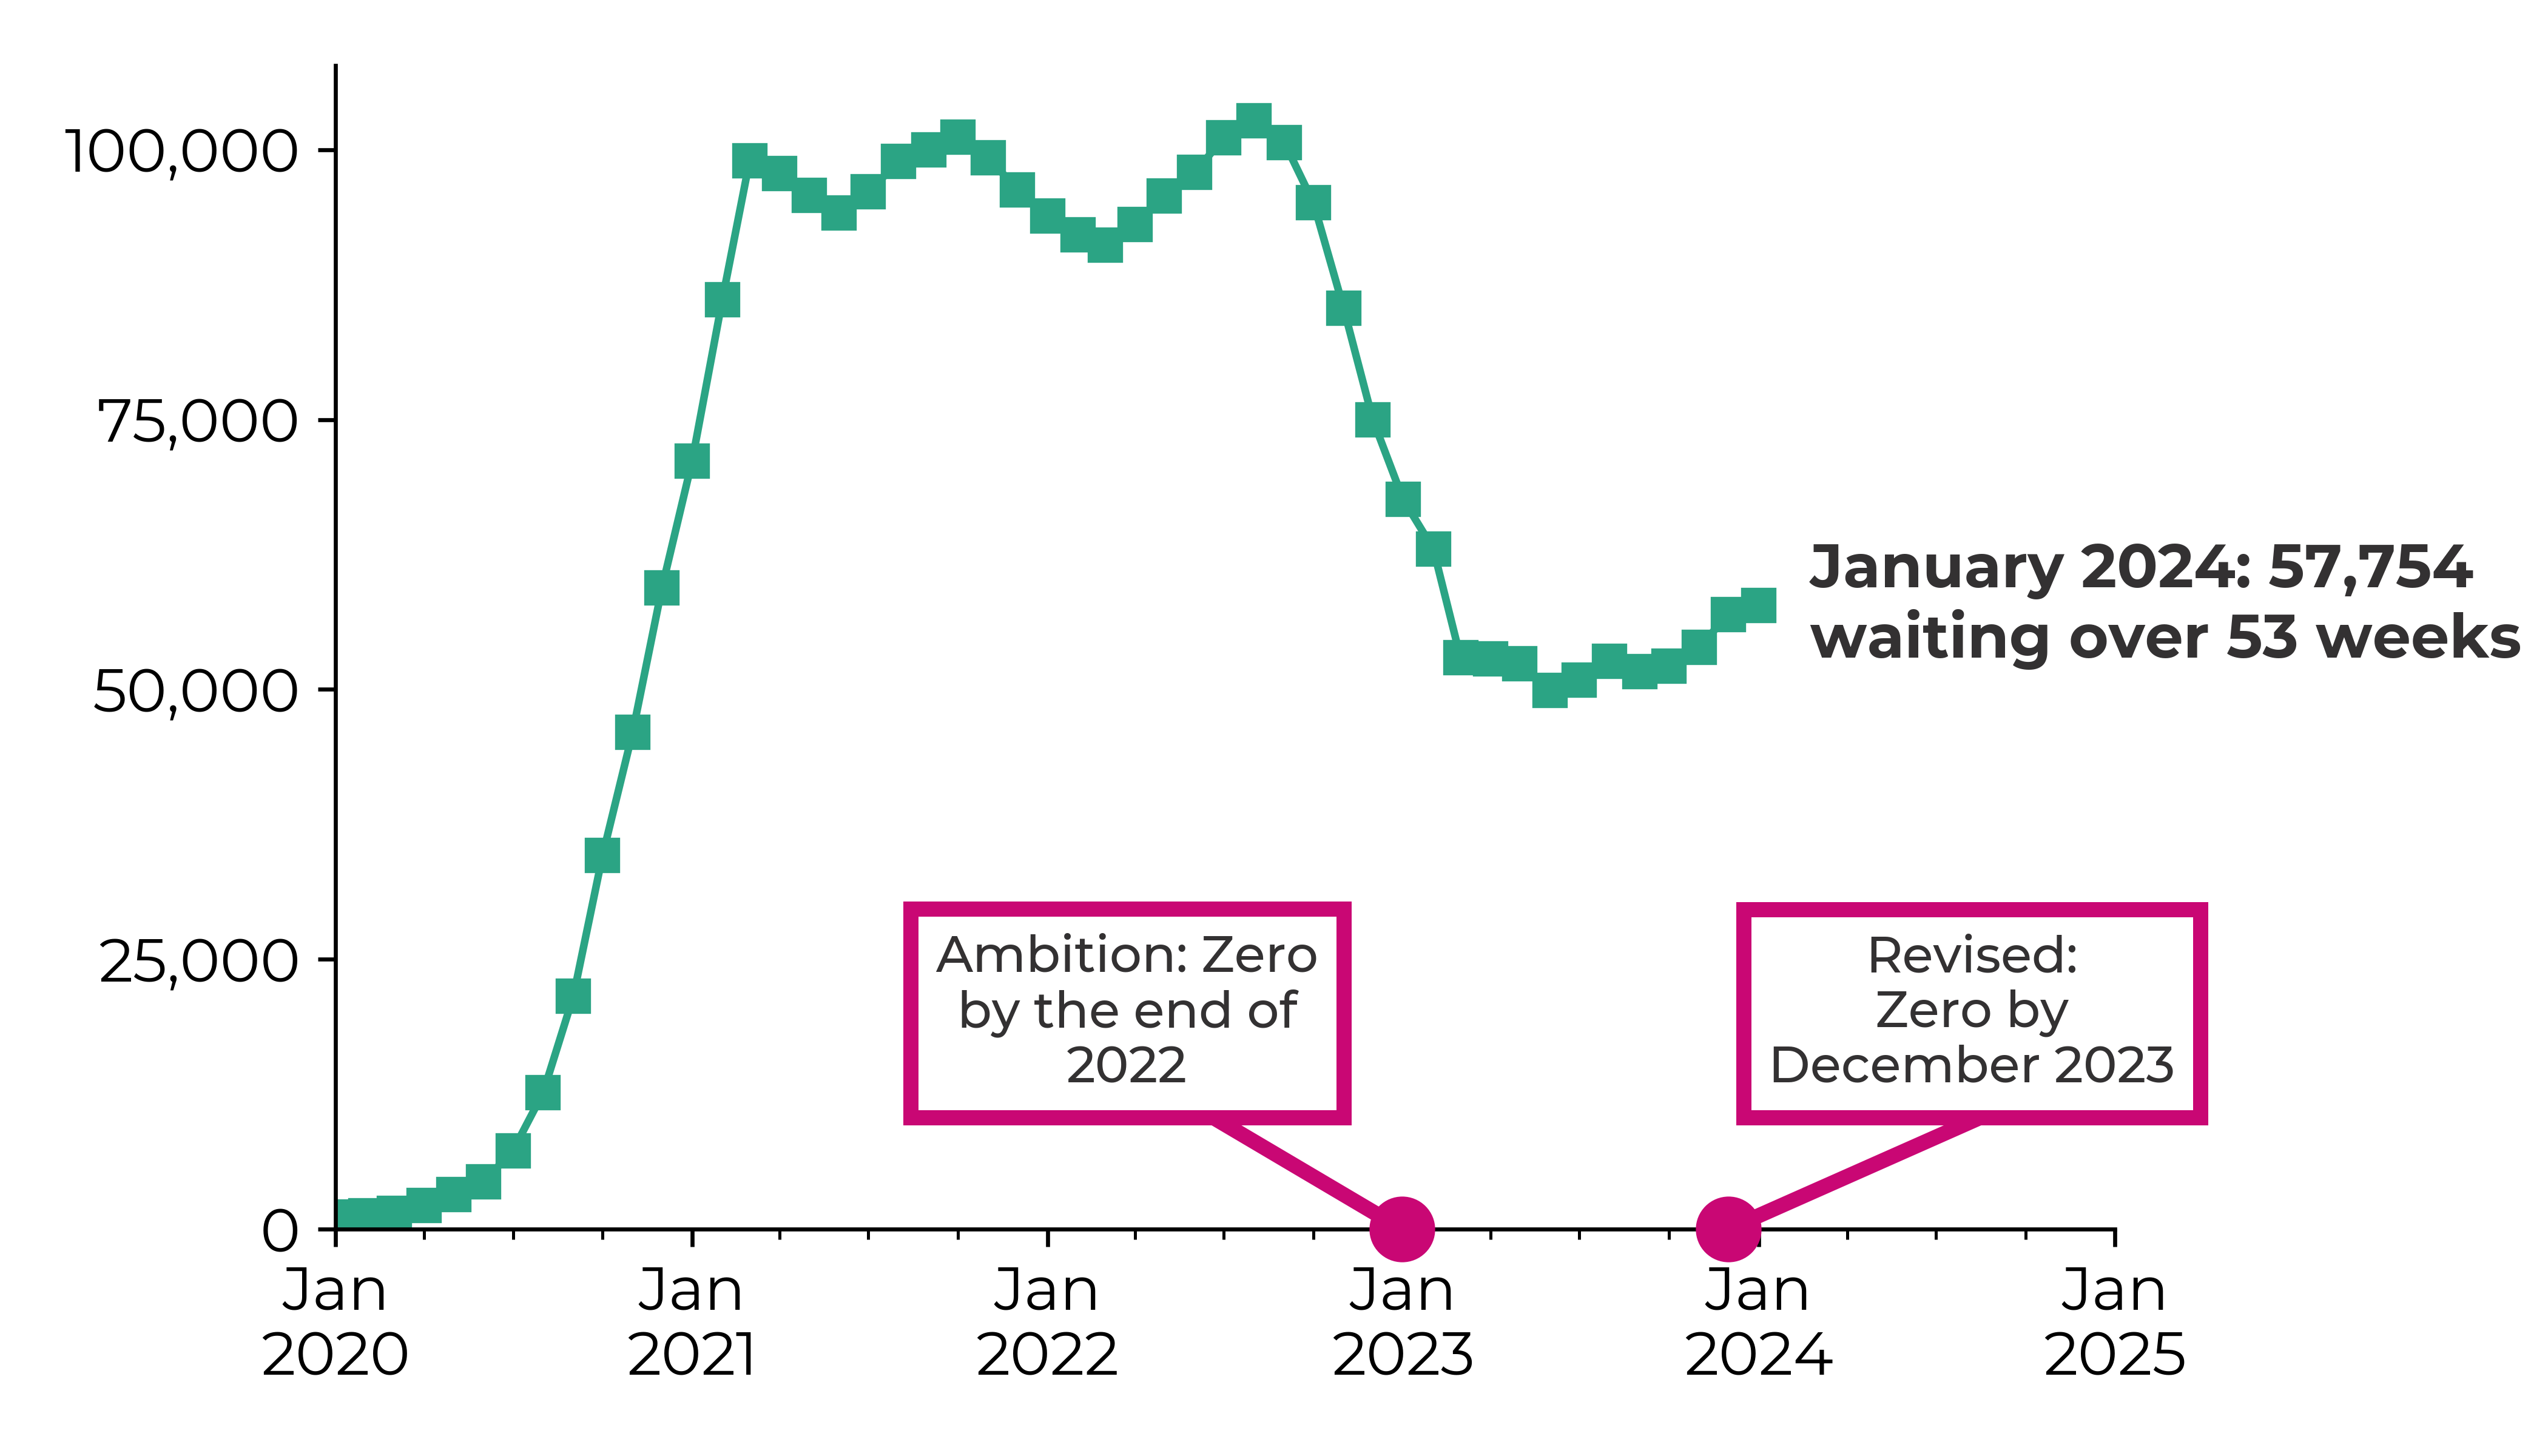 Graph showing the number of patient pathways waiting over 53 weeks increased from 1,115 in January 2020 to 52,925 in March 2023. Against an ambition of zero by the end of 2022.